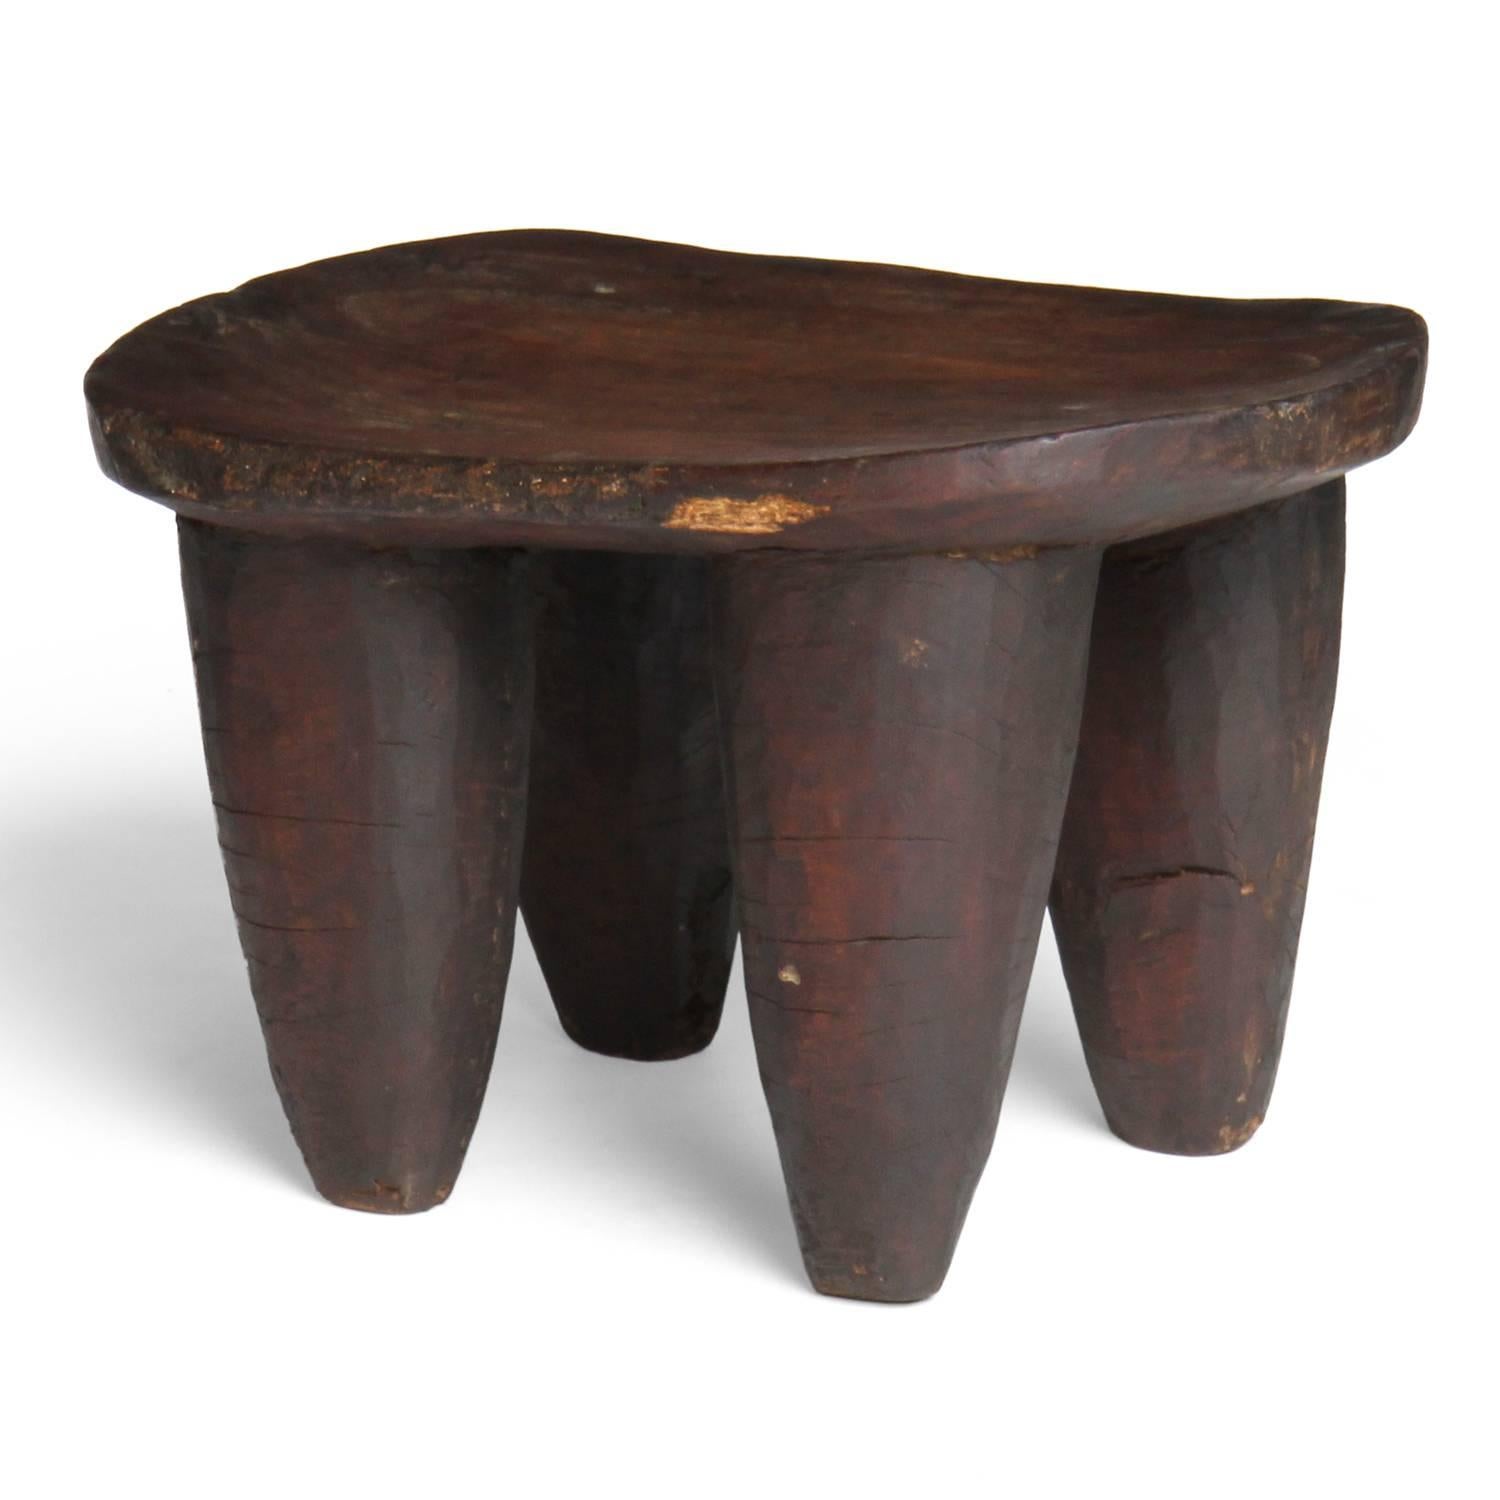 A diminutive and finely carved four-legged tribal stool crafted from a single piece of dense hardwood.